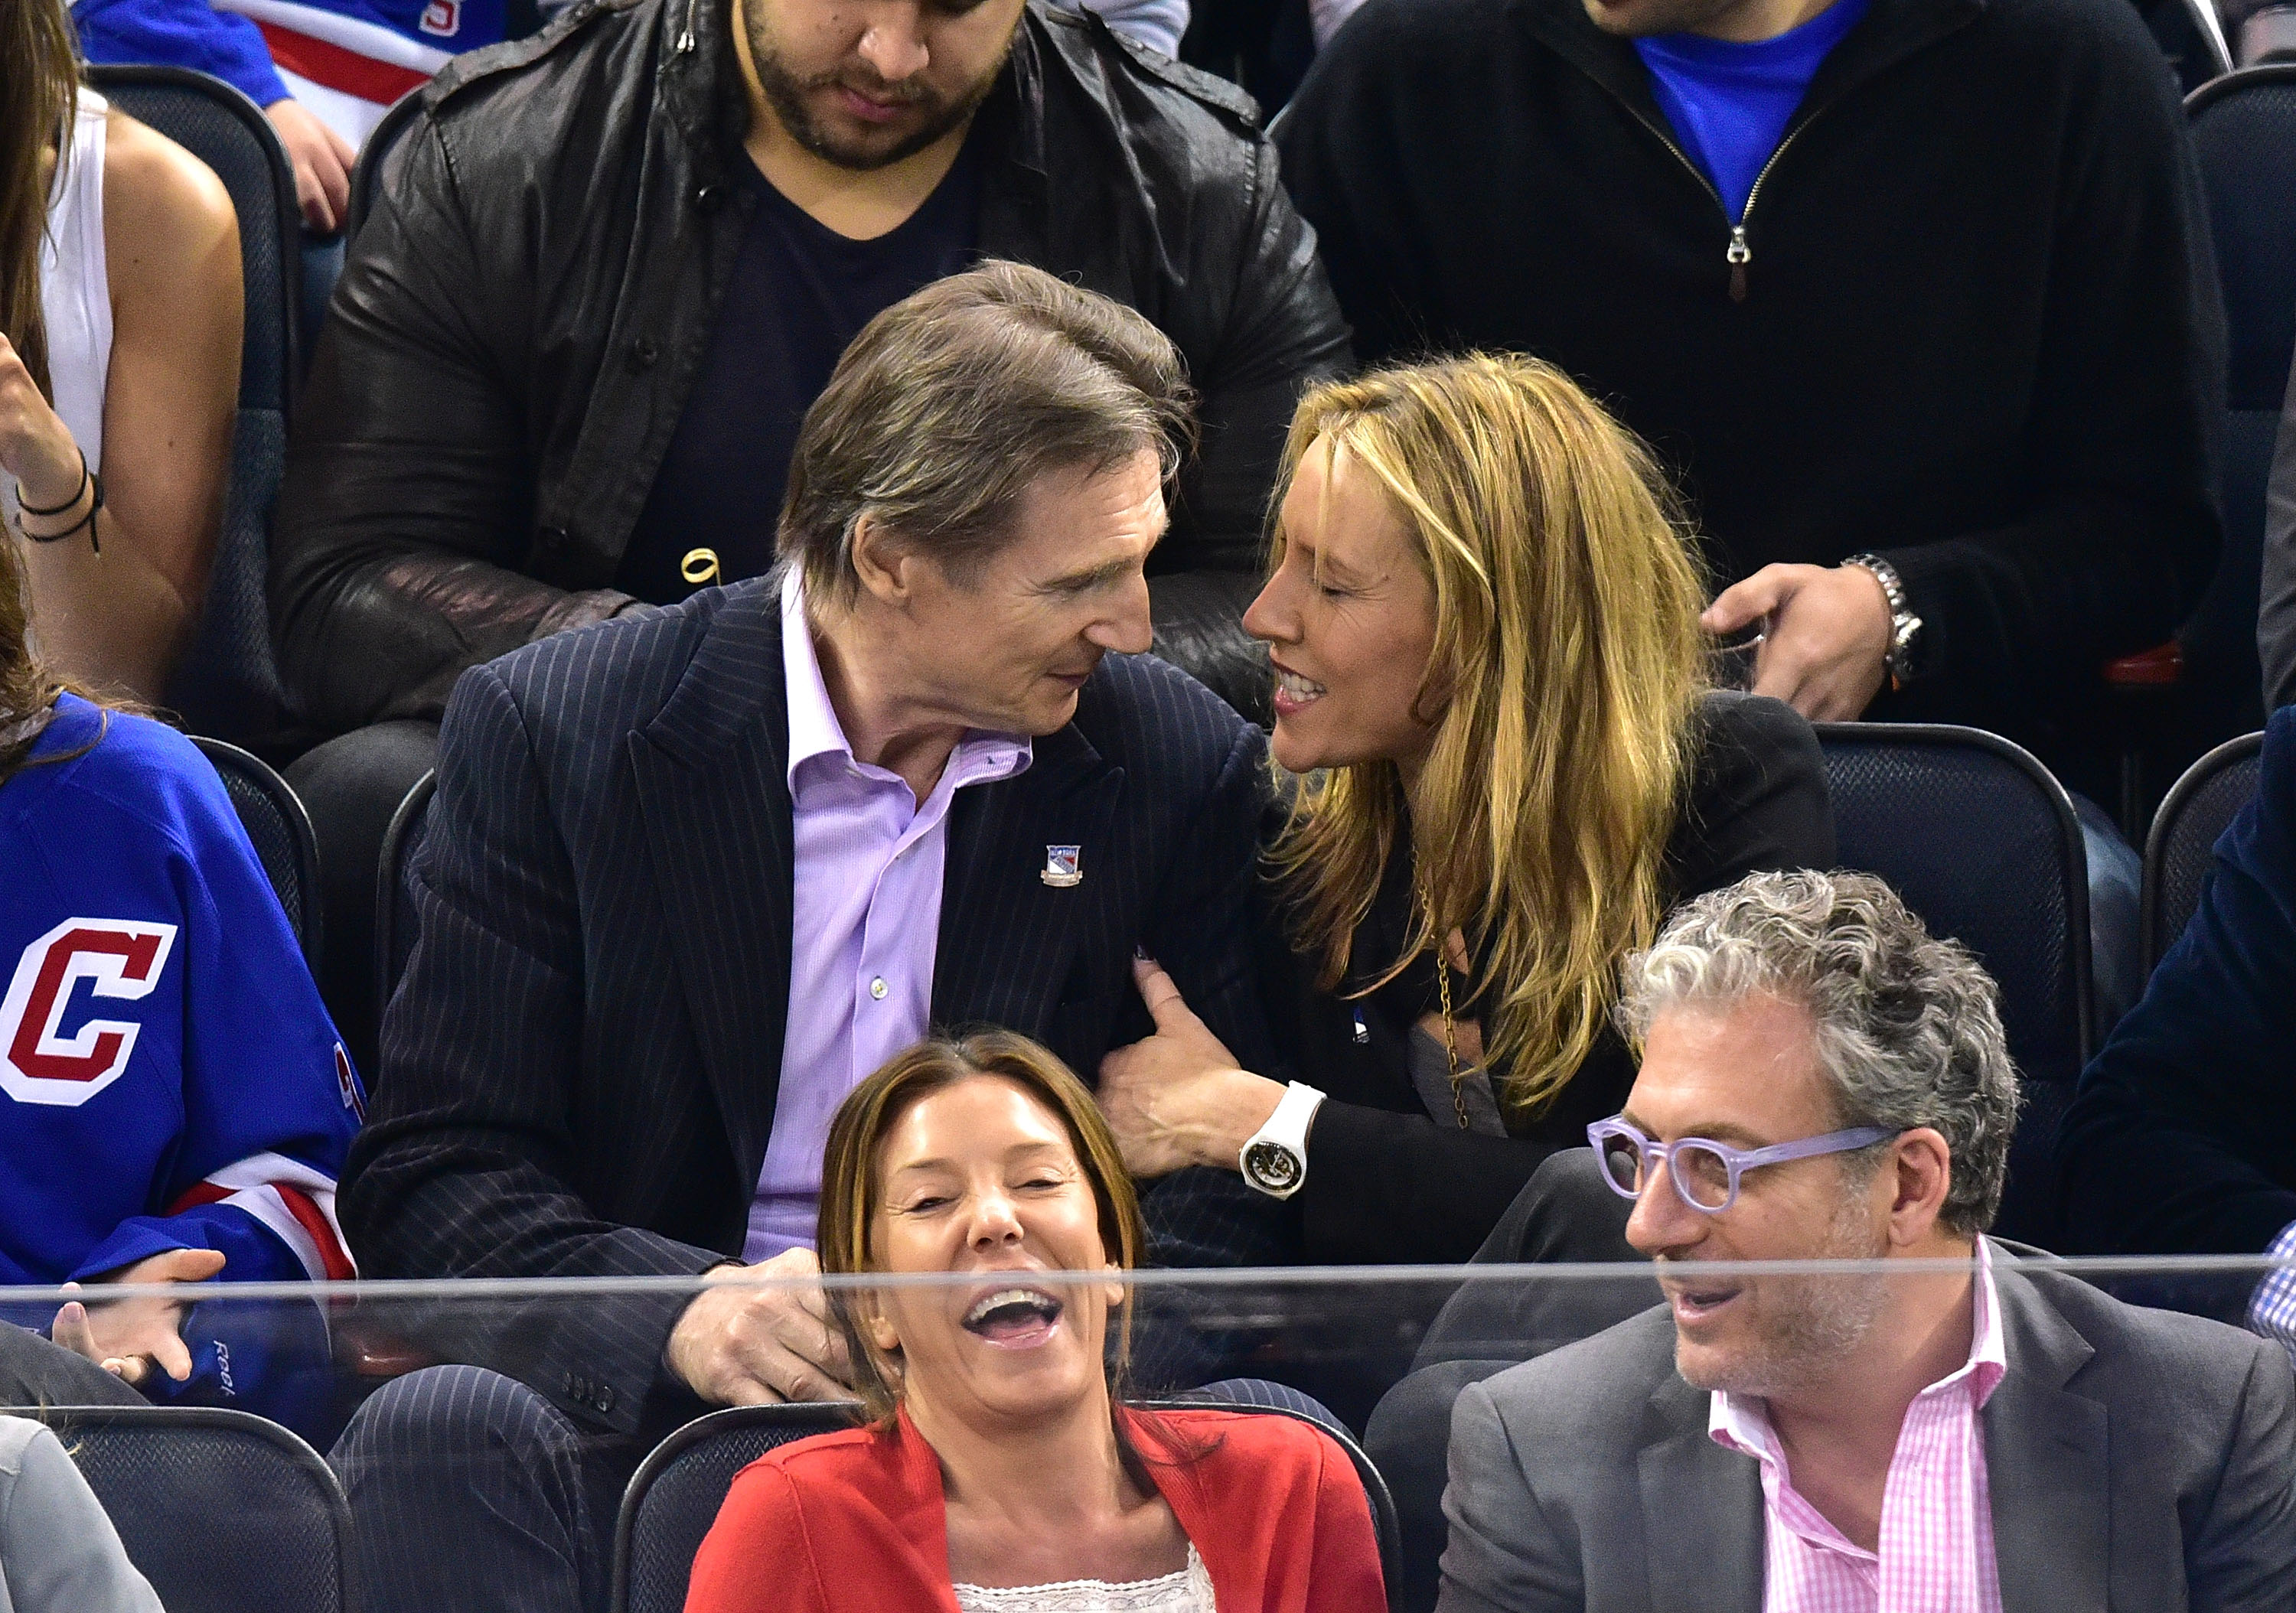 Liam Neeson and Freya St. Johnson at the Tampa Bay Lightning Vs New York Rangers Playoff Game in 2015 | Source: Getty Images